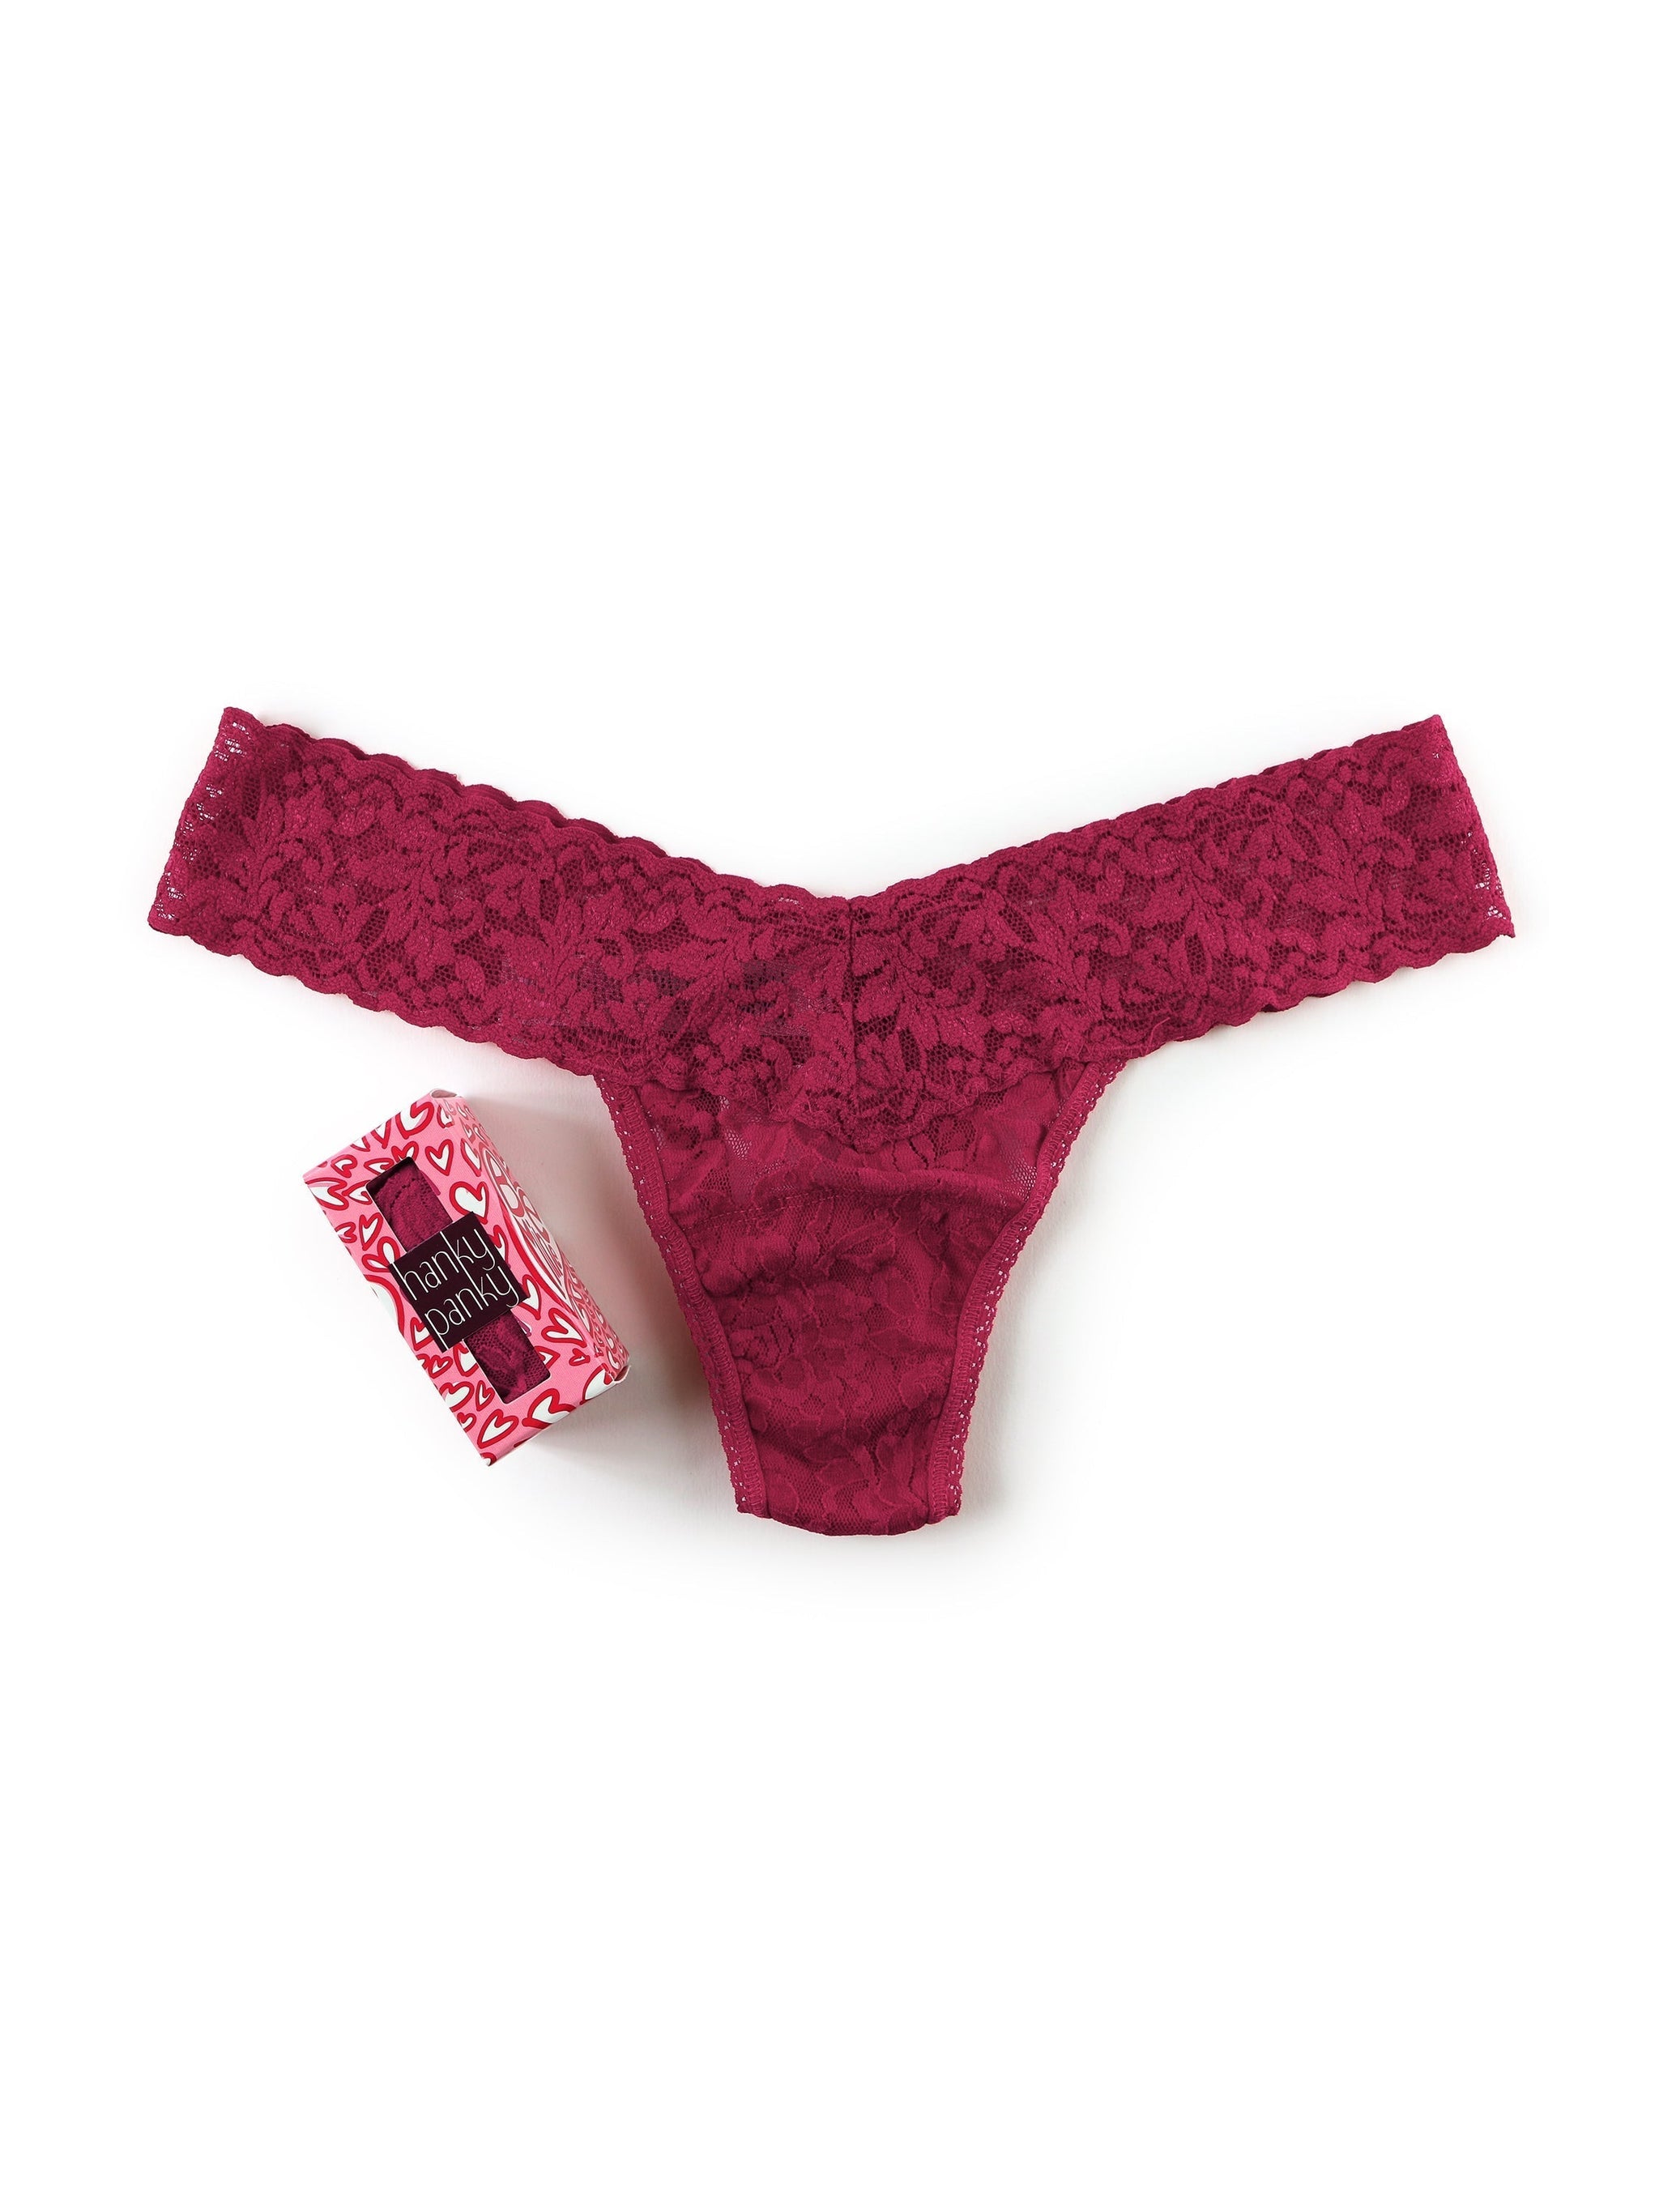 Hanky Panky Women's Daily Lace Low Rise Thong - One Size - Fairy Dust Pink  : Target